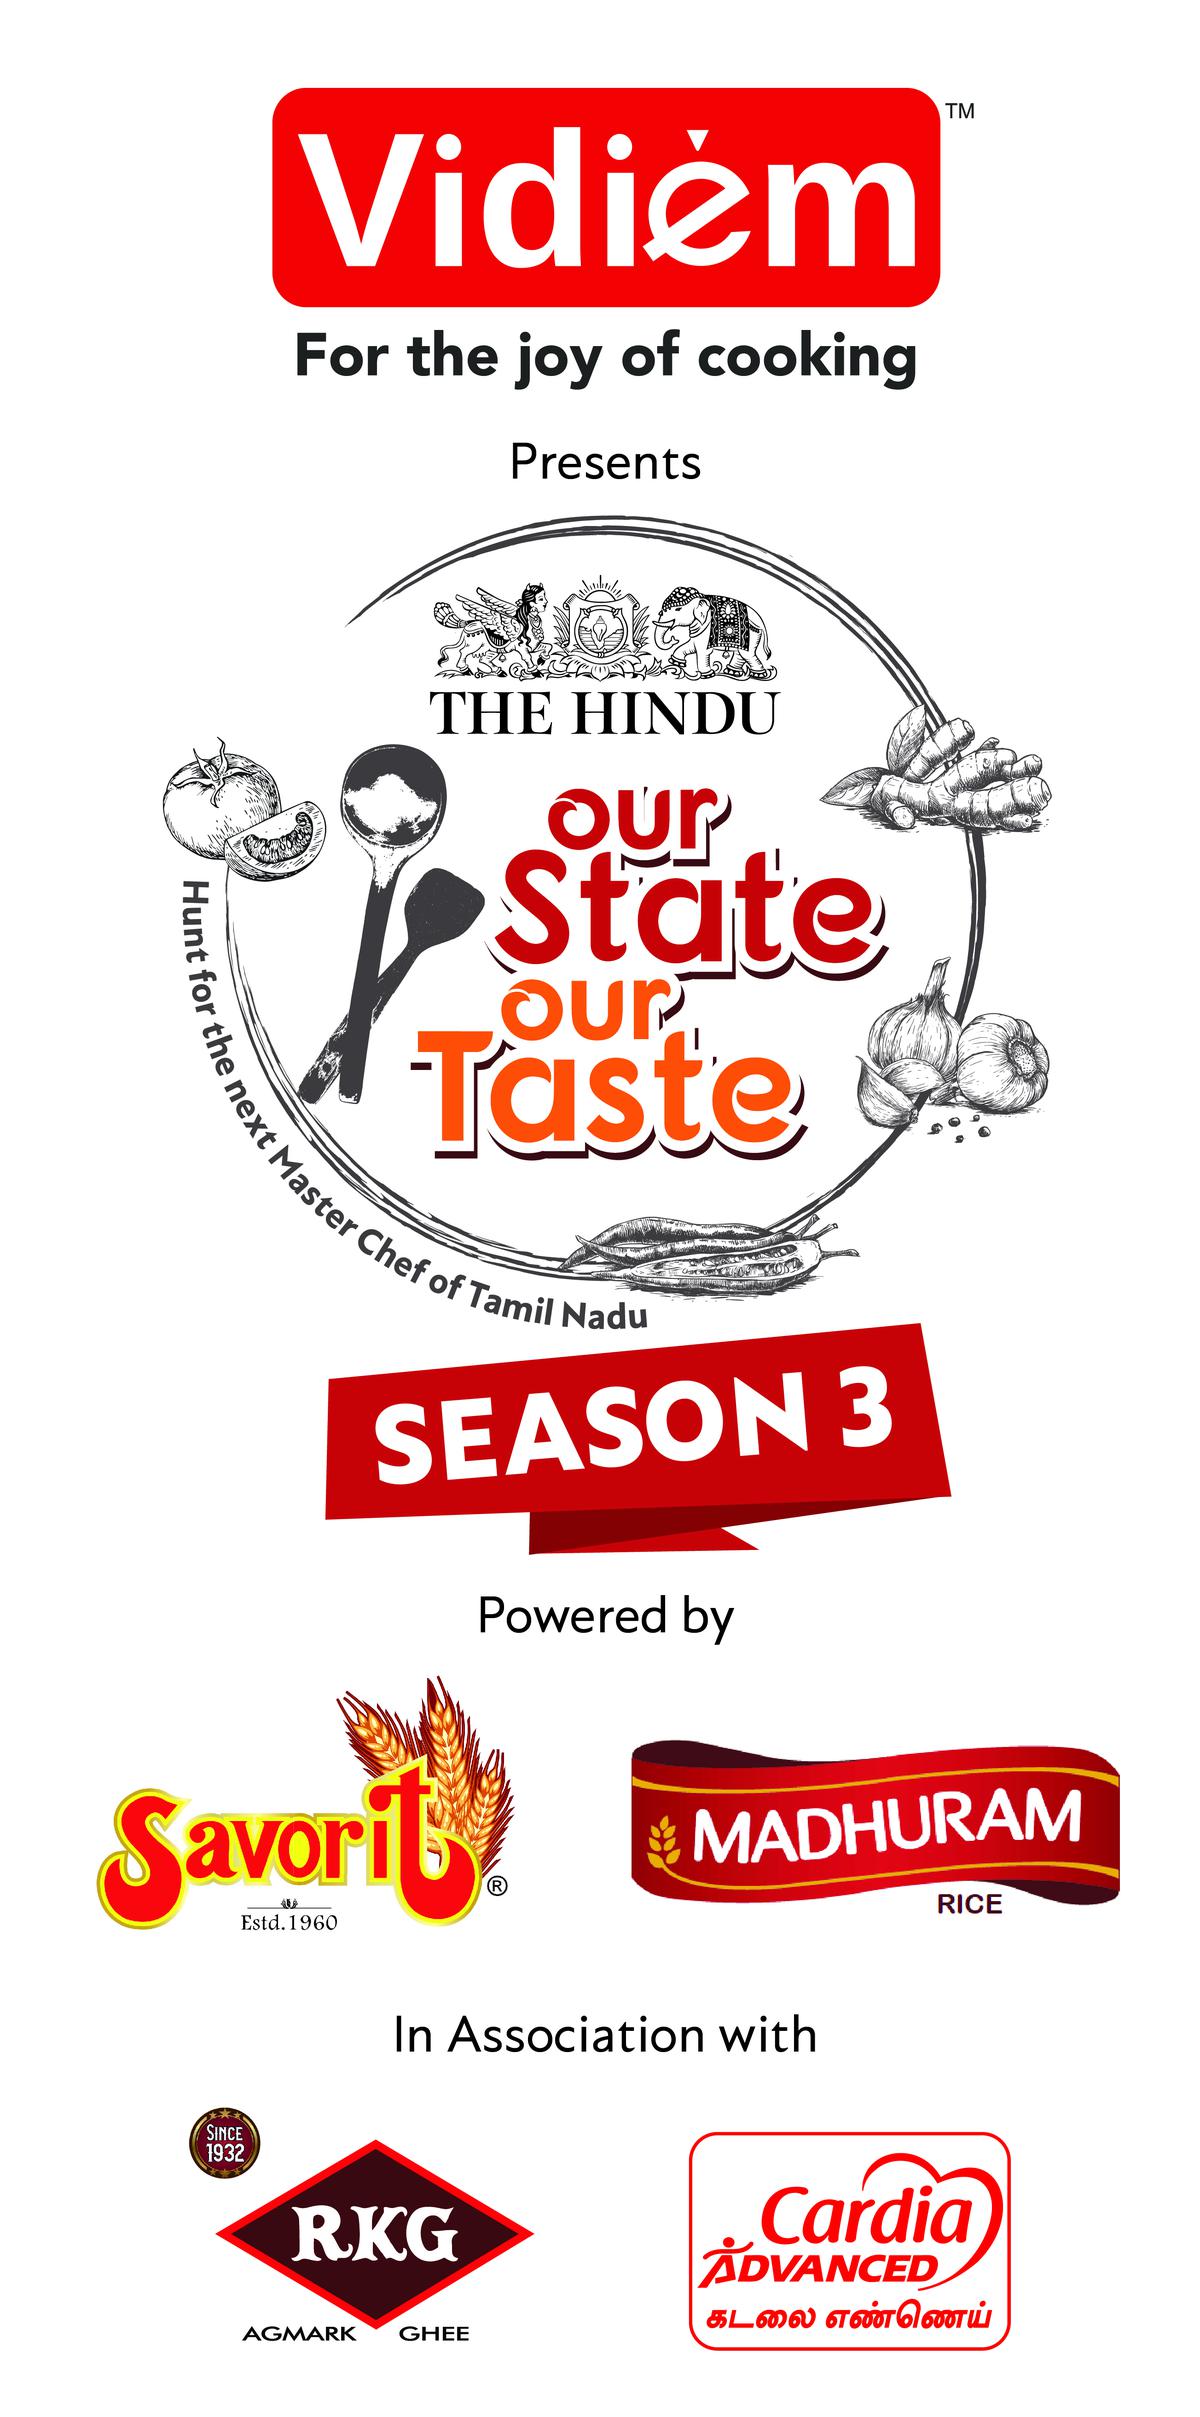 The grand finale of Our State Our Taste will be held in Chennai on July 23